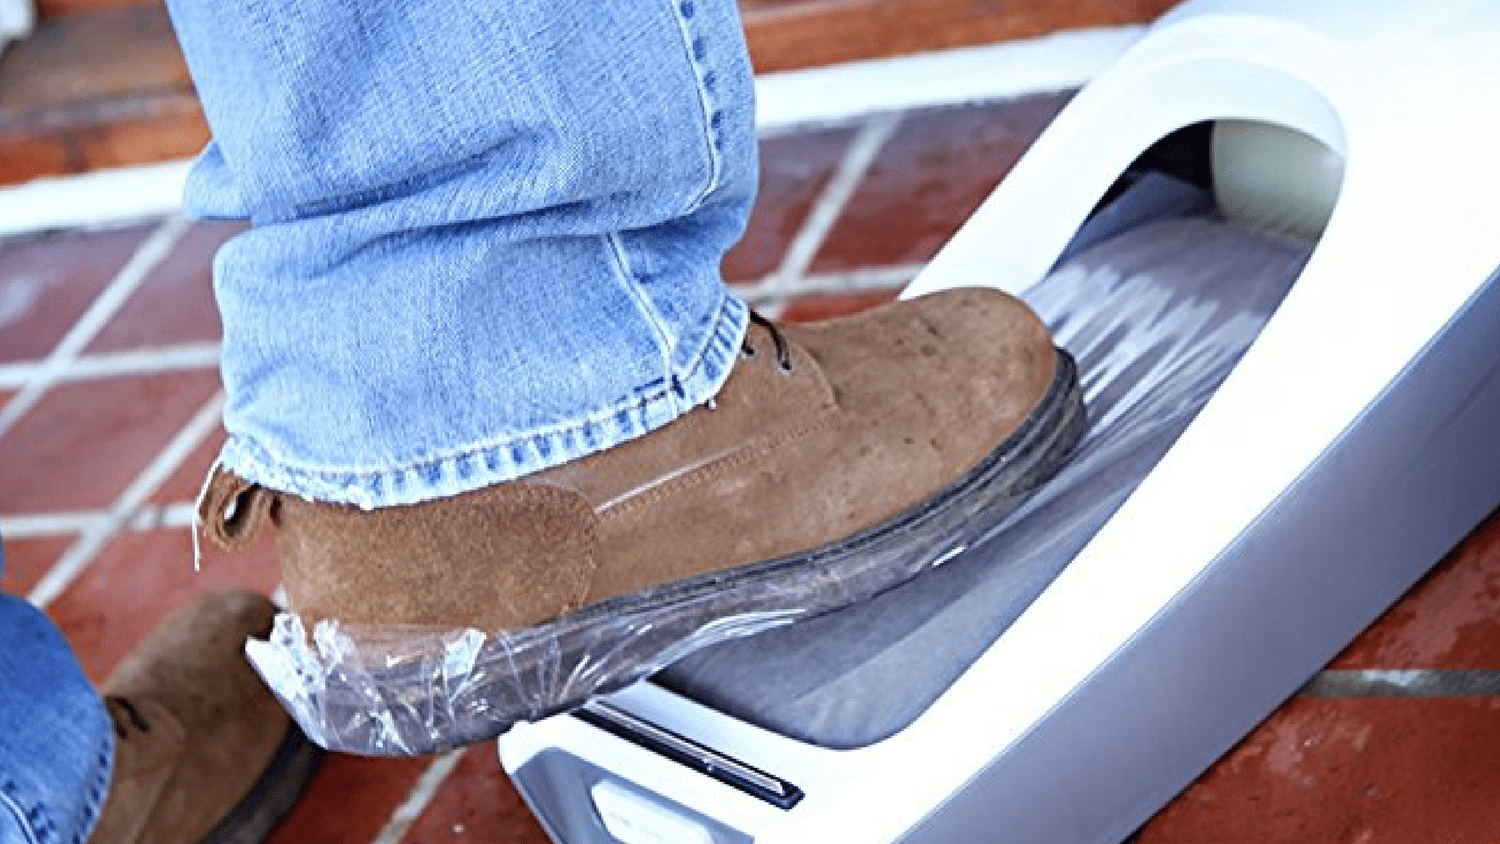 Shoe-Wrapping Devices That Keep Floors 